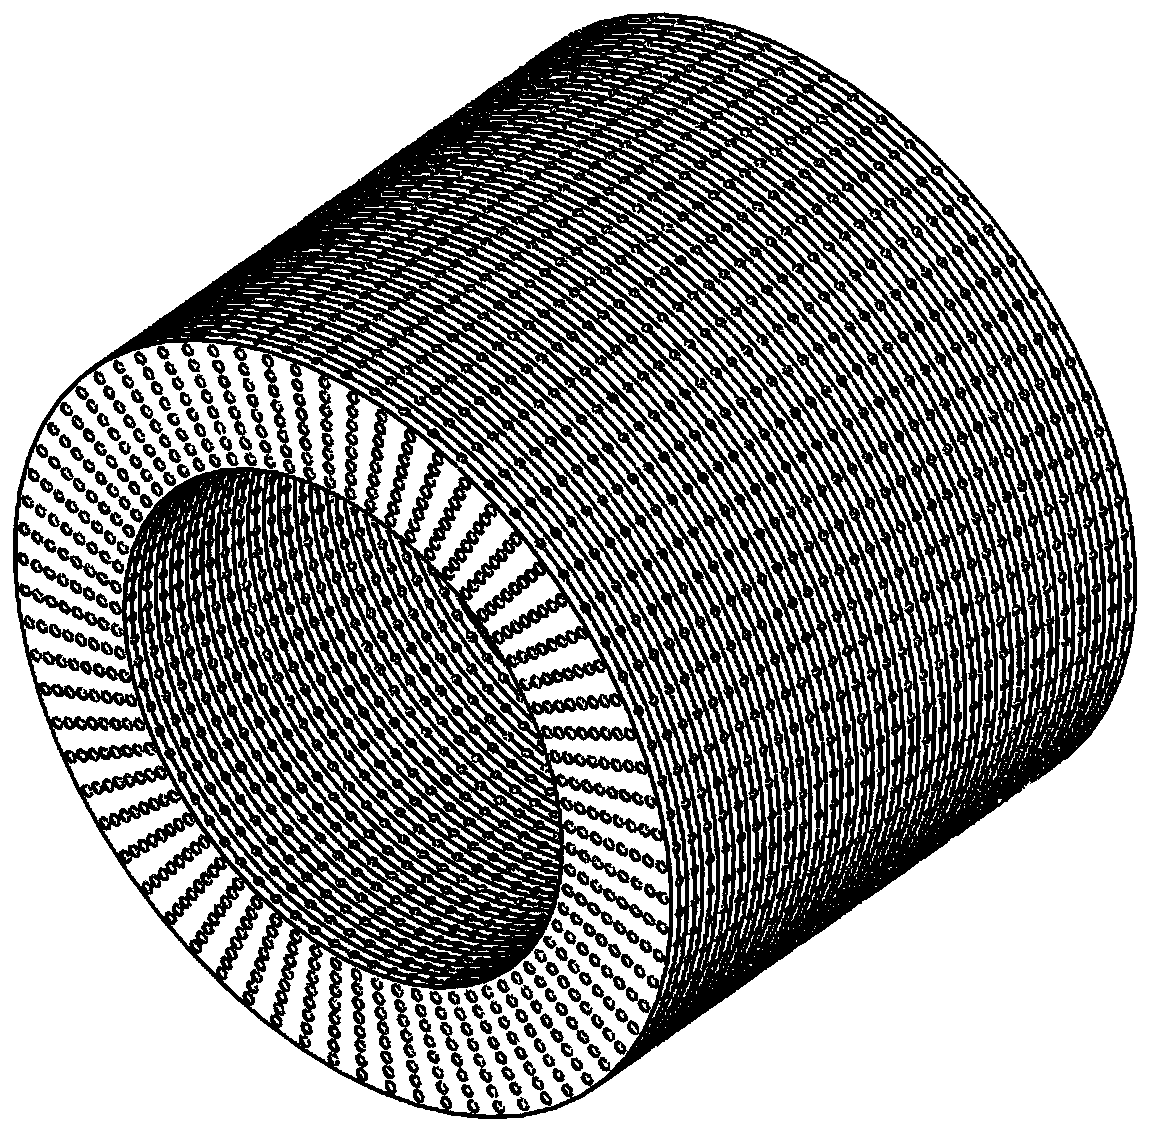 Microchannel heat exchanger core applicable to gas turbine system